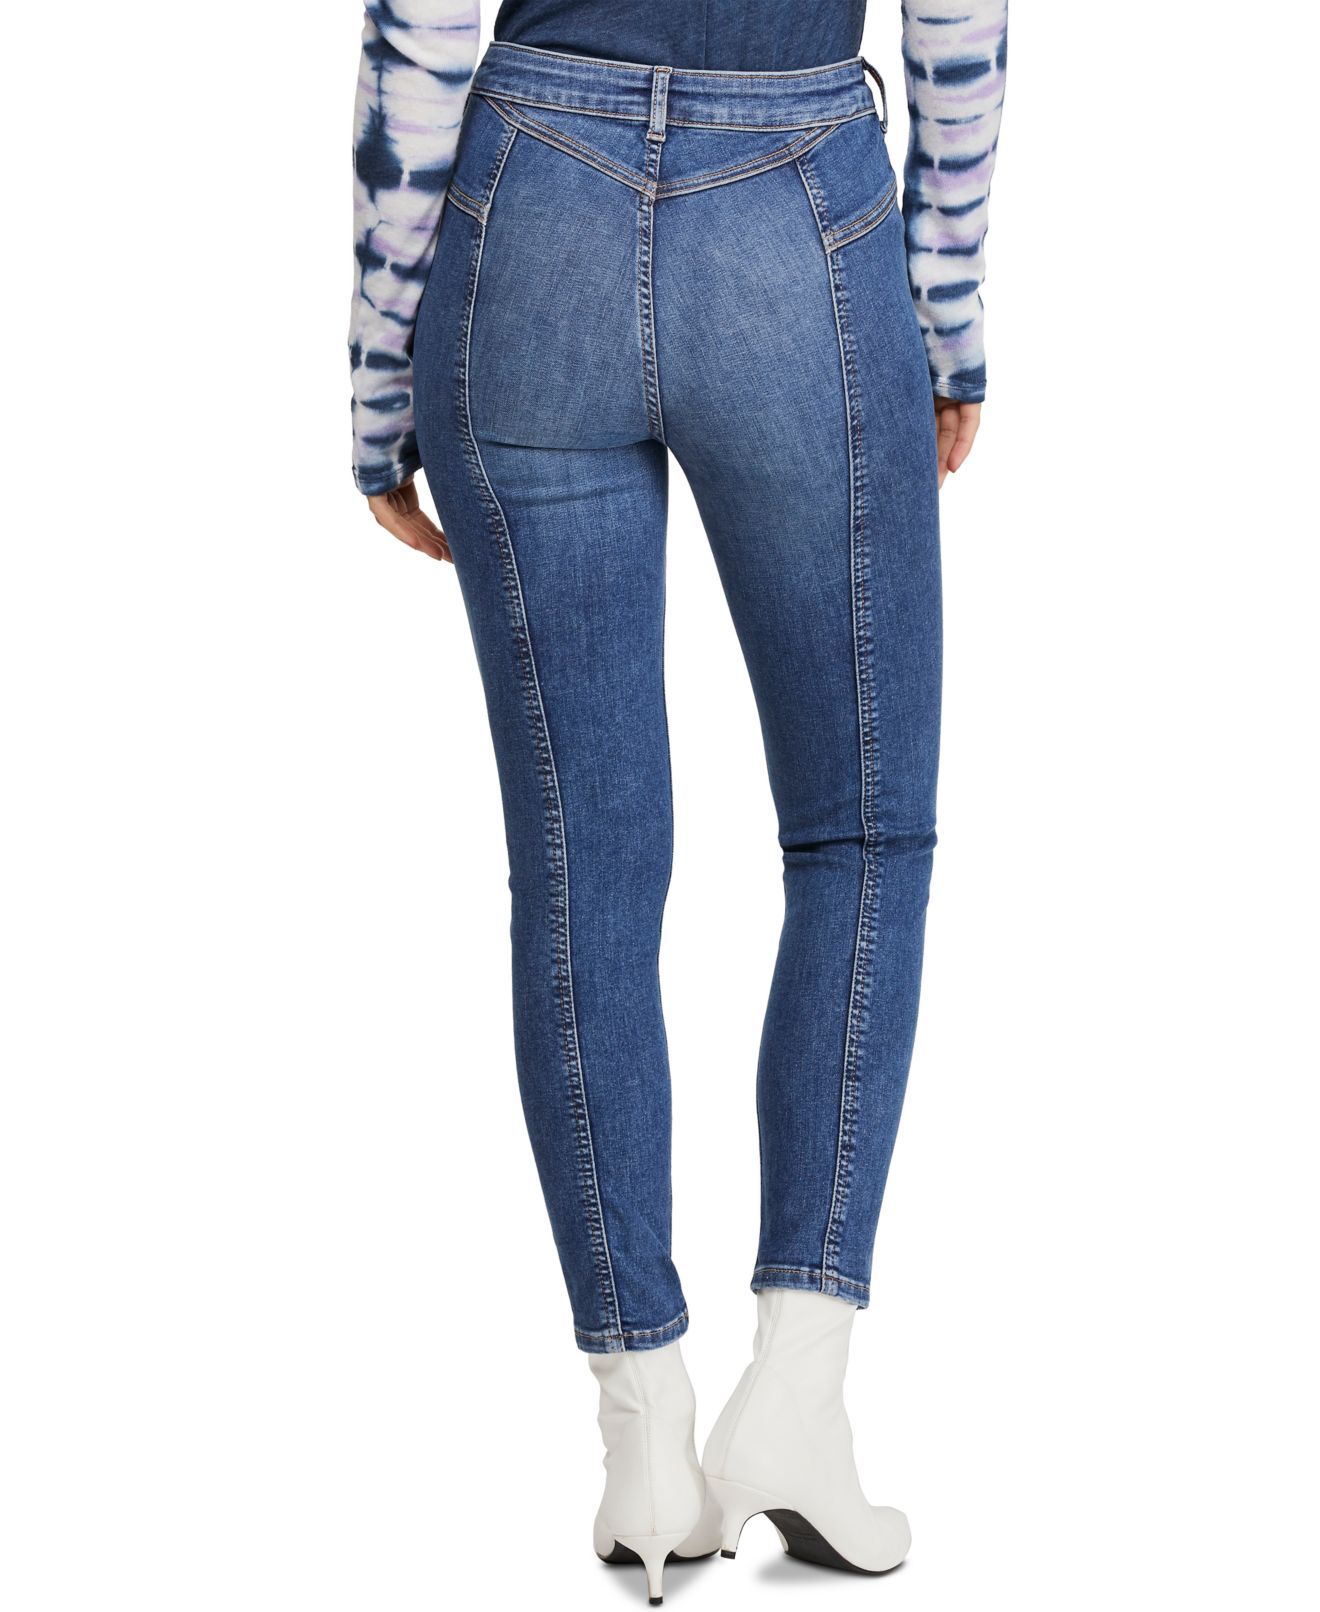 Color: Blues Size Type: Regular Bottoms Size (Women's): 27 Inseam: 27 Type: Jeans Style: Skinny Rise: Mid Material: Cotton Blends Fabric Wash: Light Stretch: YES